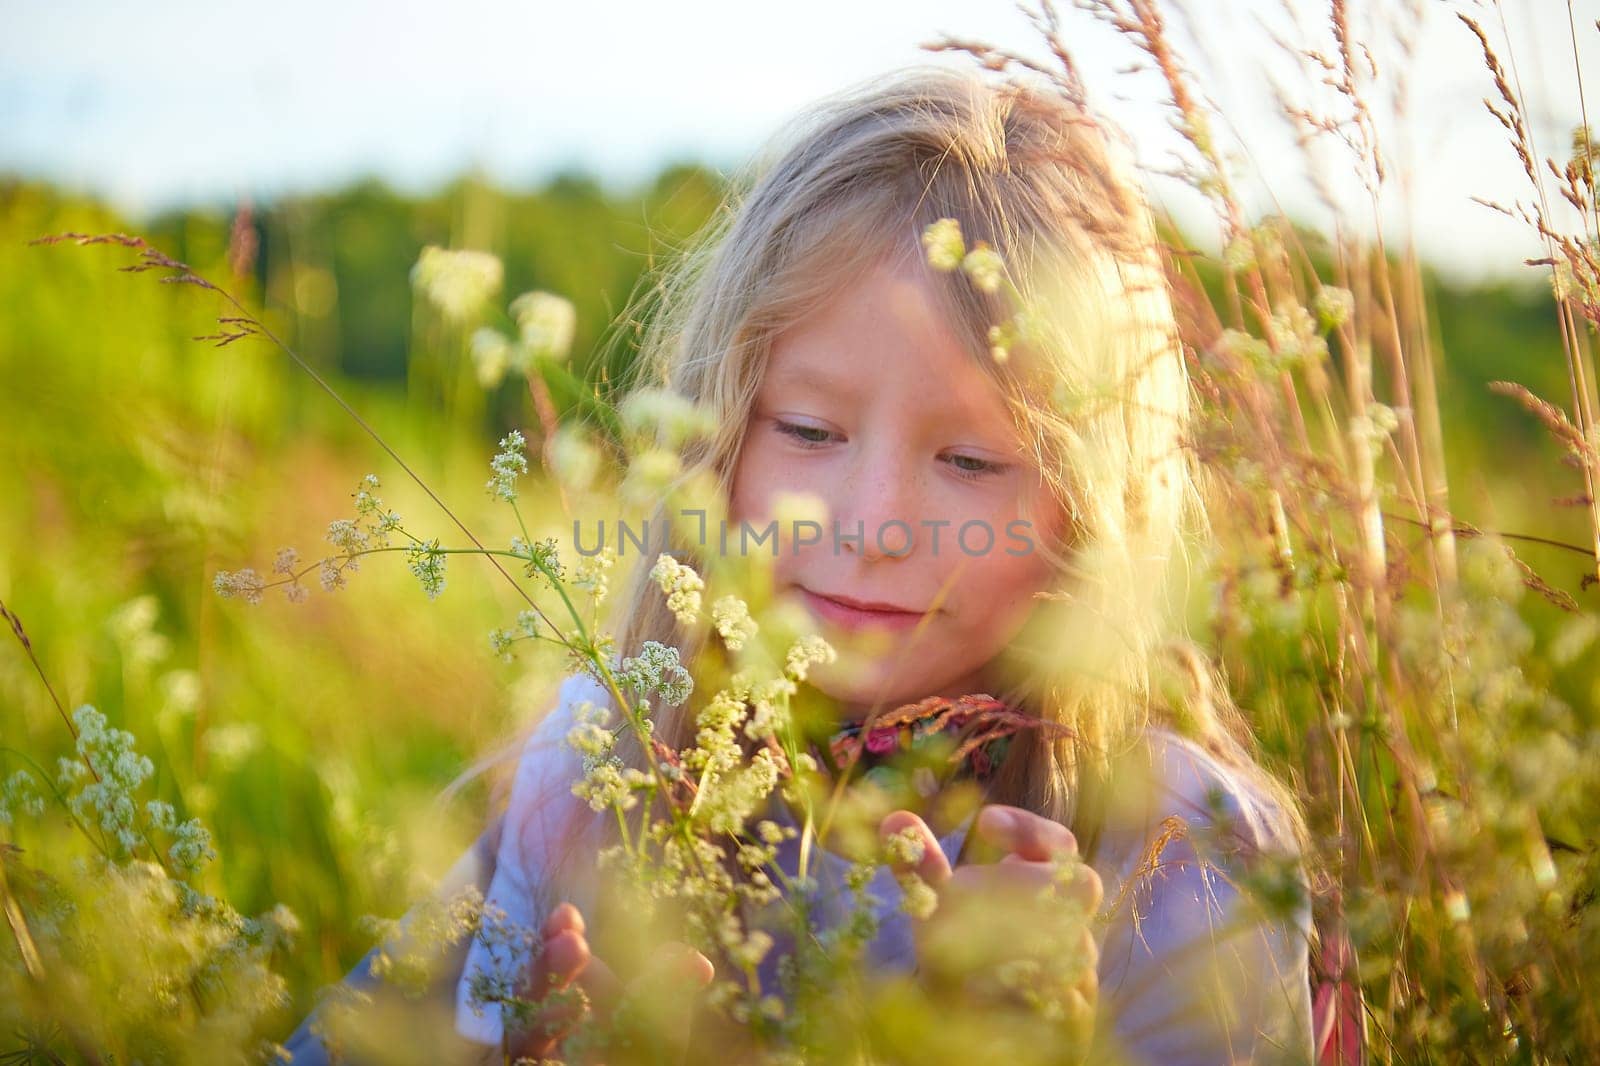 Portrait of pretty blonde girl having fun in a meadow on a natural landscape with grass and flowers on a sunny summer day. Portrait of a teenage child in summer or spring outdoors on field